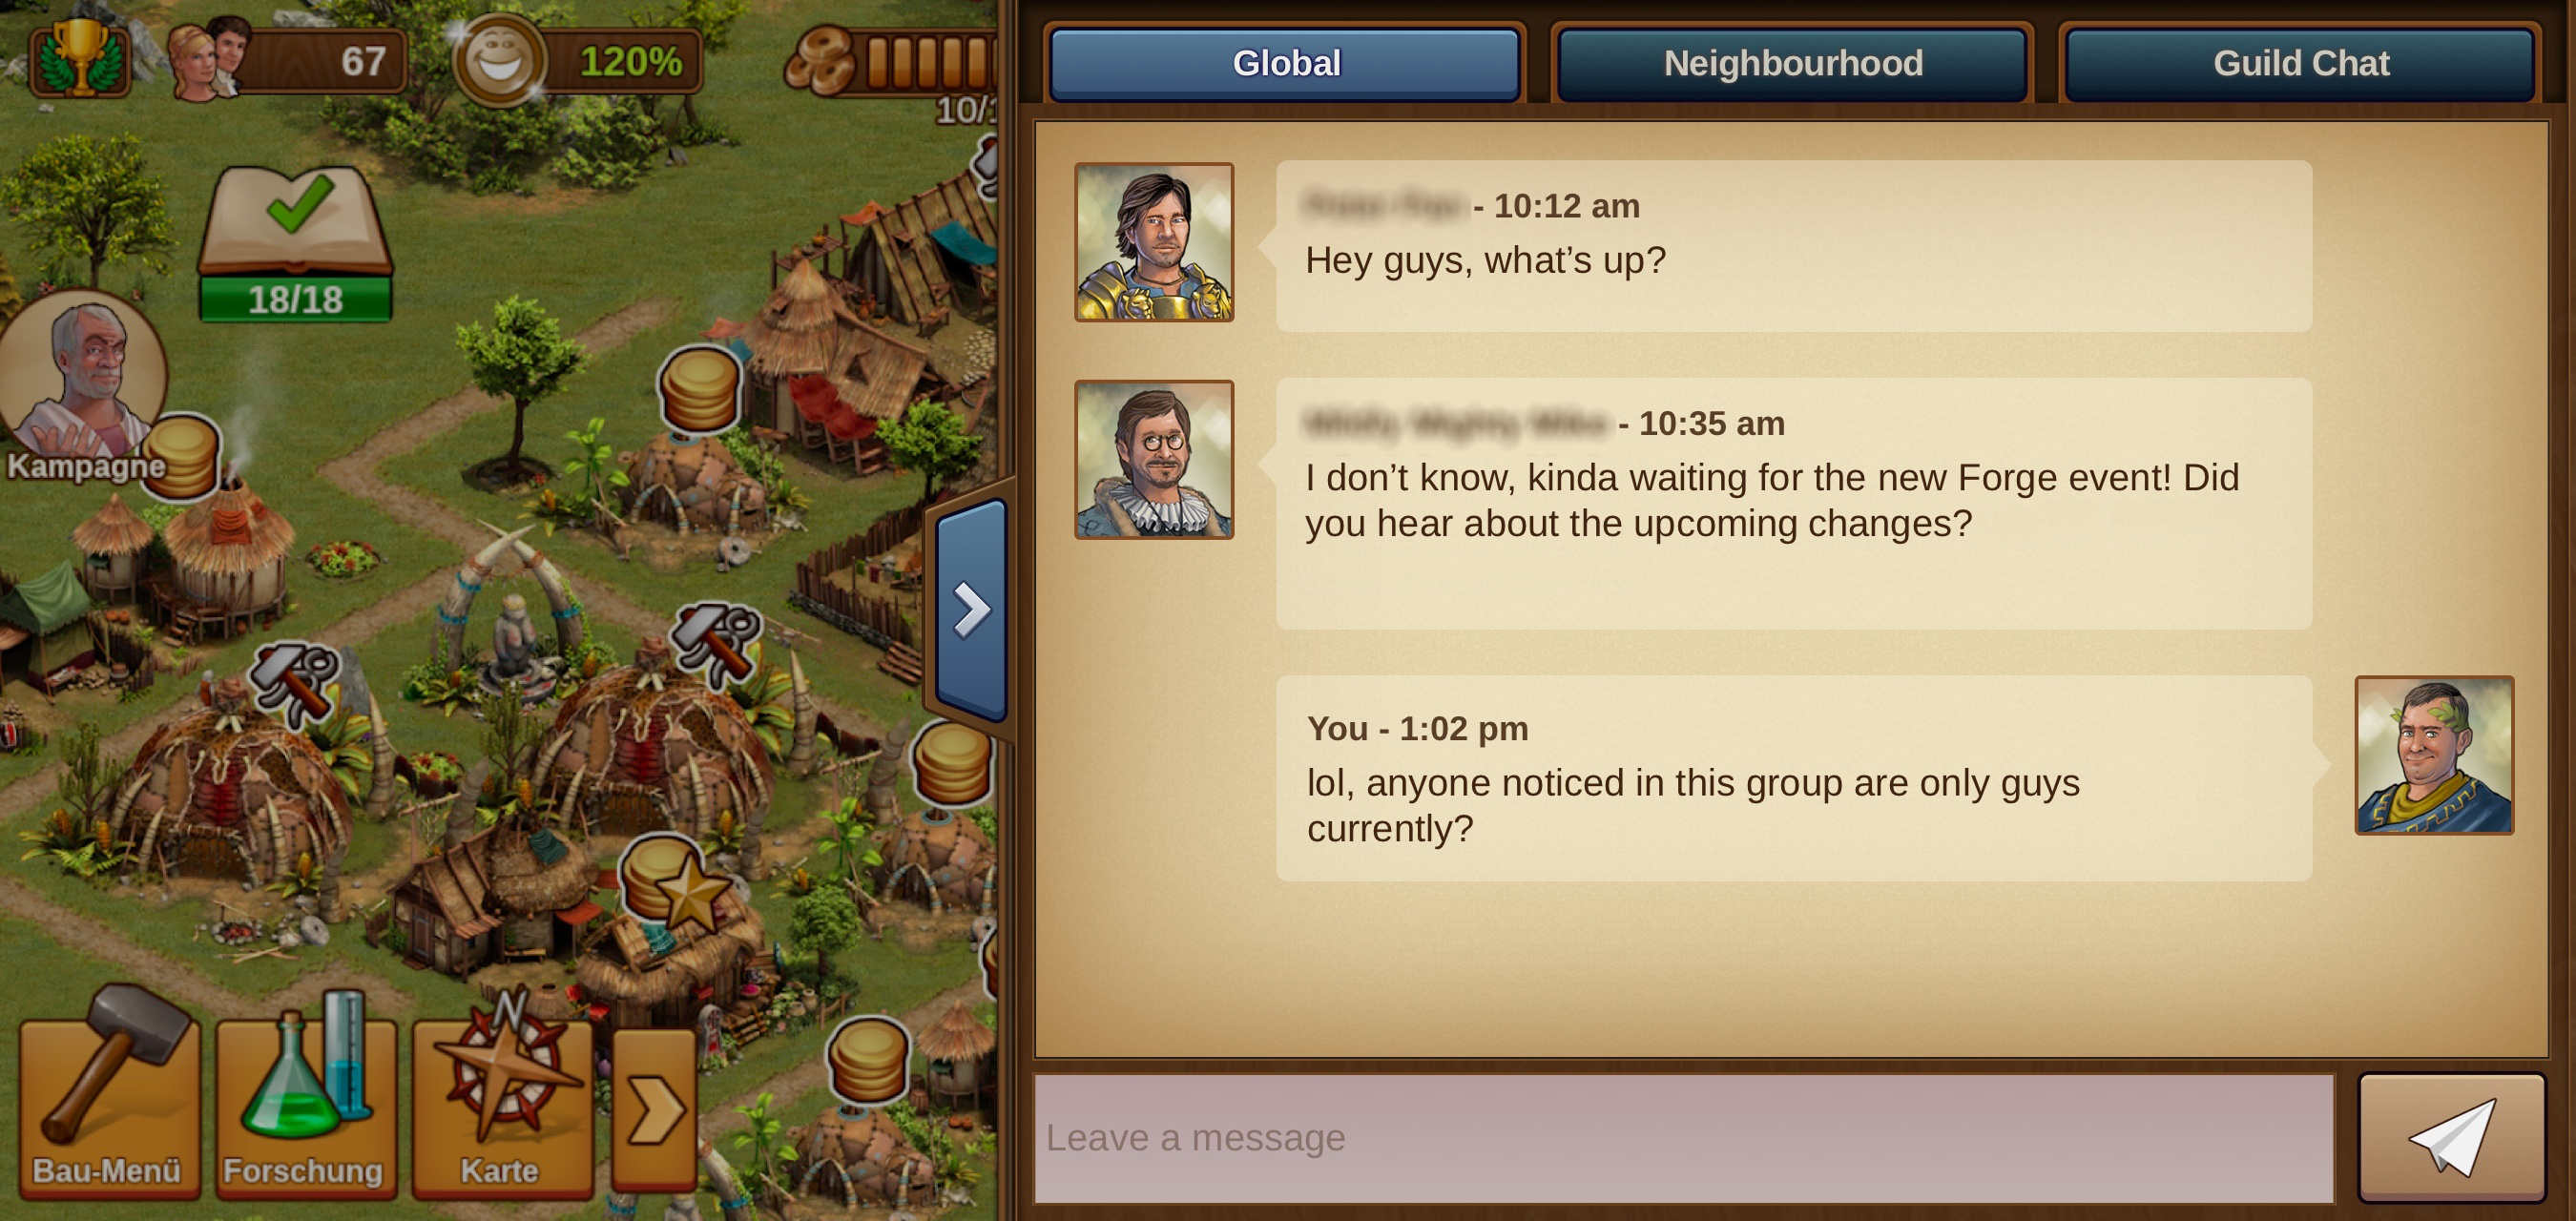 MChat_GlobalChat.png